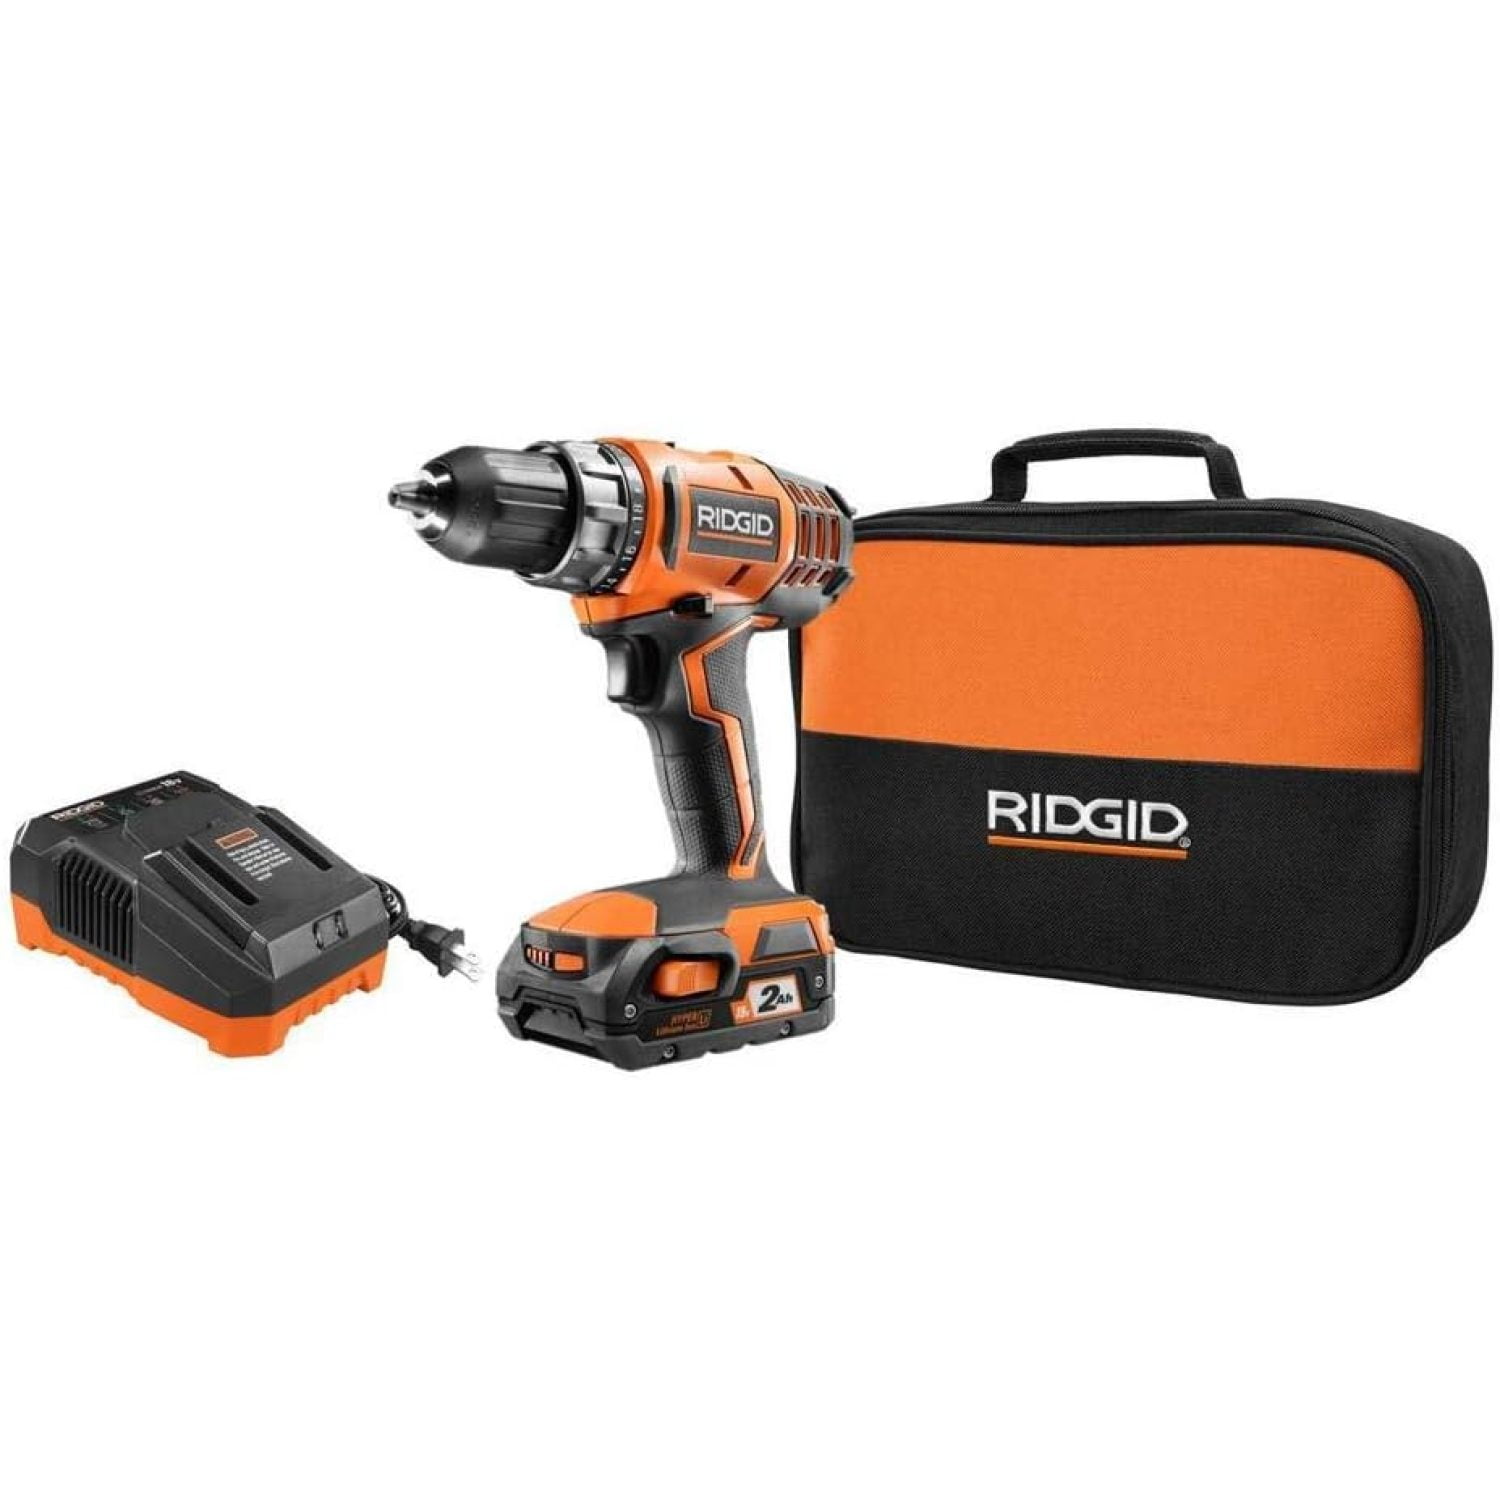 20V 1/2 IN. Drill Driver Kit with PWR CORE 20™ 2.0Ah Lithium Battery